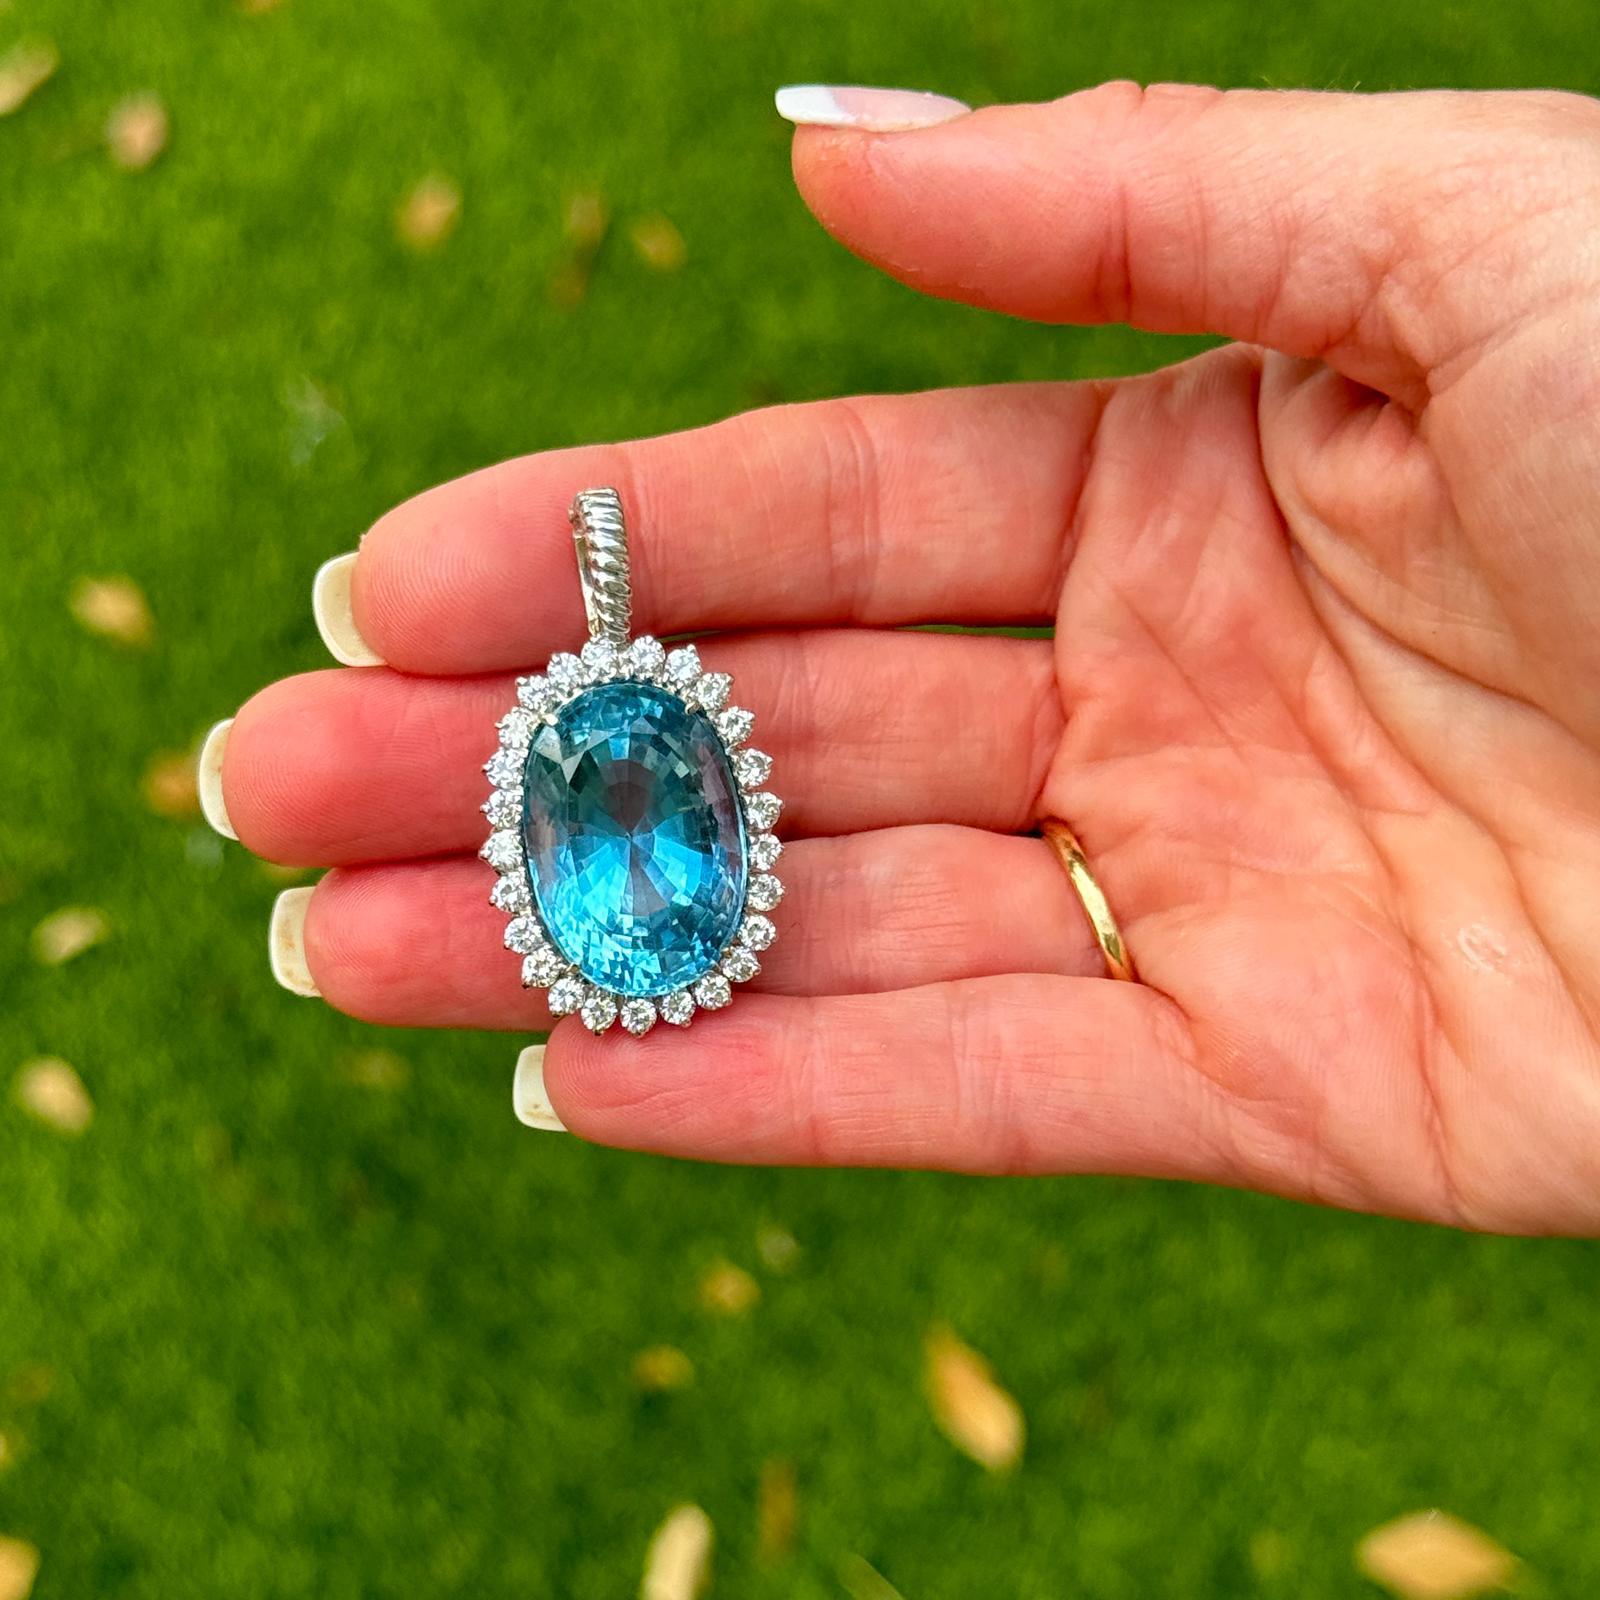 This modern 36-carat oval blue topaz diamond pendant is a striking piece of contemporary jewelry that combines bold gemstone elegance with the timeless sparkle of diamonds.
At the heart of the pendant is a sizable 36-carat oval blue topaz gemstone